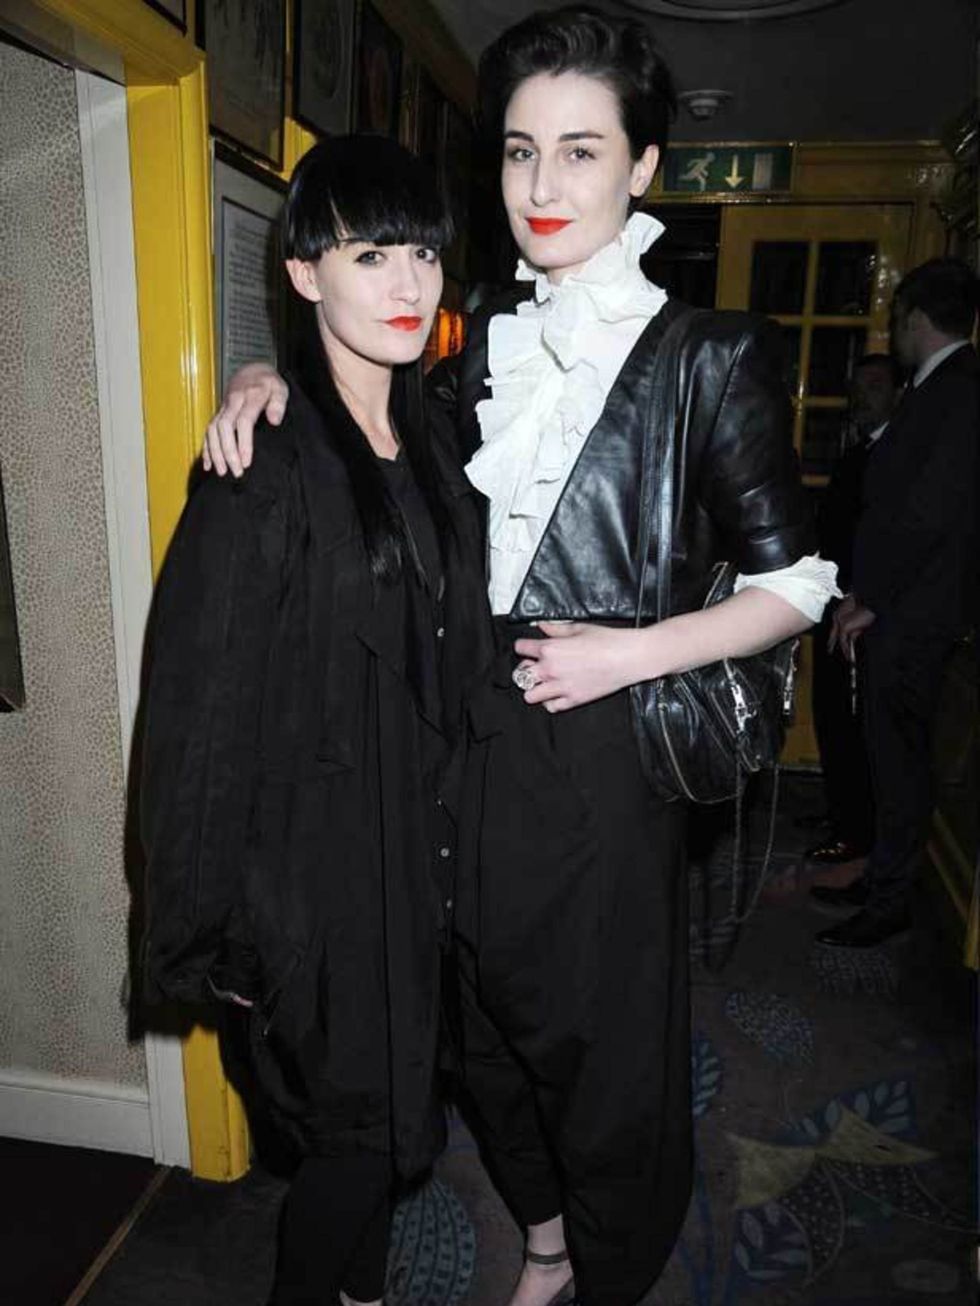 <p><a href="http://www.elleuk.com/content/search?SearchText=hannah+marshall&amp;SearchButton=Search">Hannah Marshall</a> and <a href="http://www.elleuk.com/content/search?SearchText=erin+o+connor+style+file&amp;SearchButton=Search">Erin O'Connor</a> atten